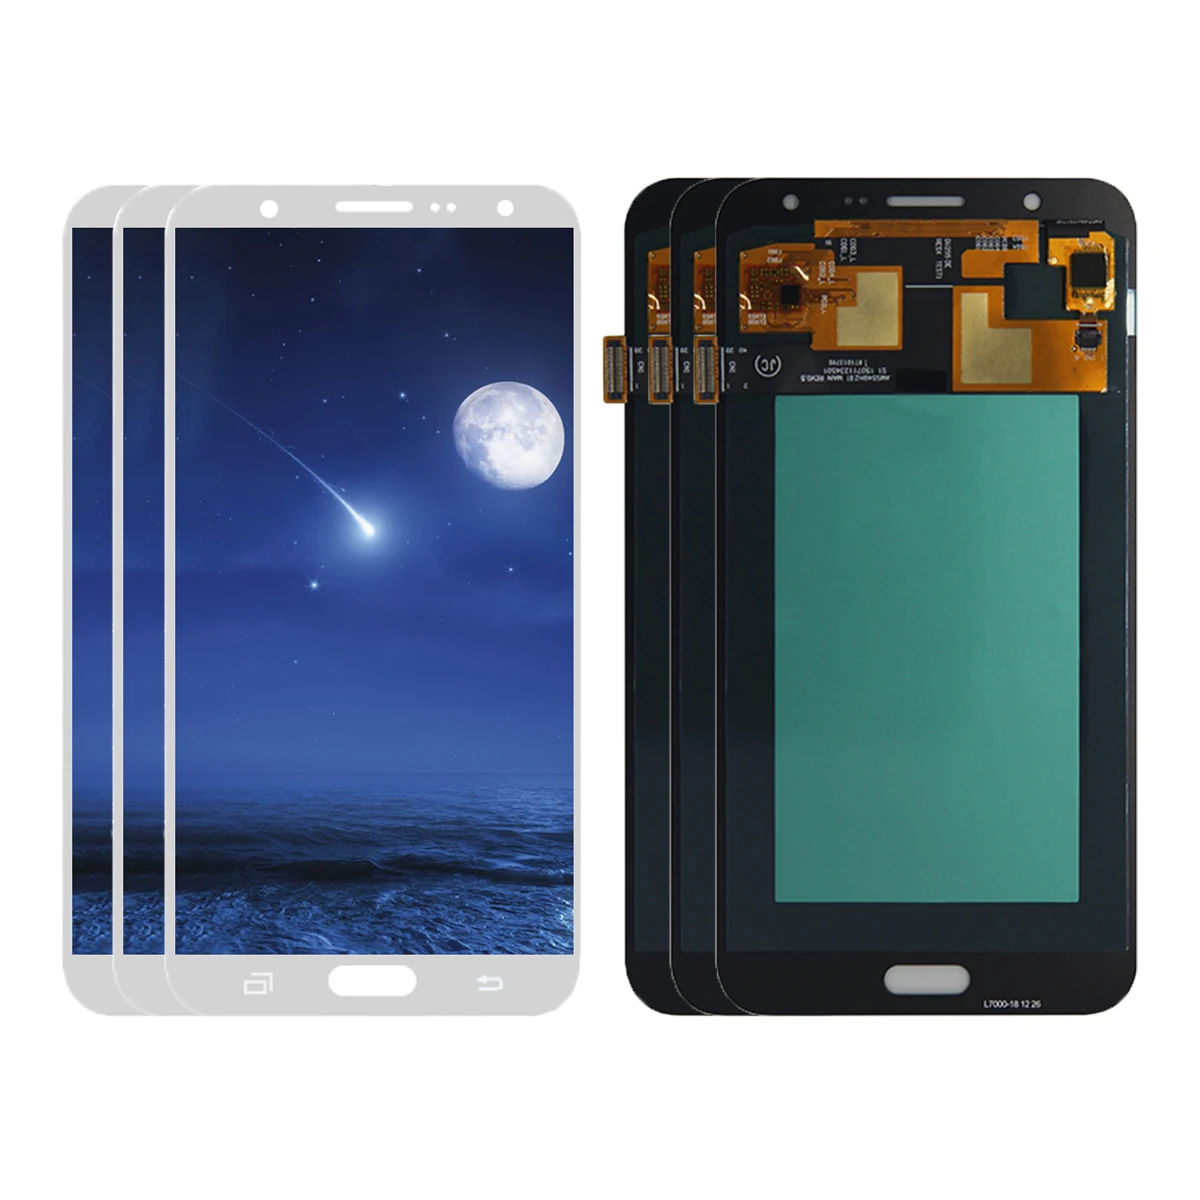 Wholesale 3/5 PCS LCD For Samsung Galaxy J7 2015 J700 J700F J700H J700M J700T J700P Display with Touch Screen Digitizer Assembly enlarge